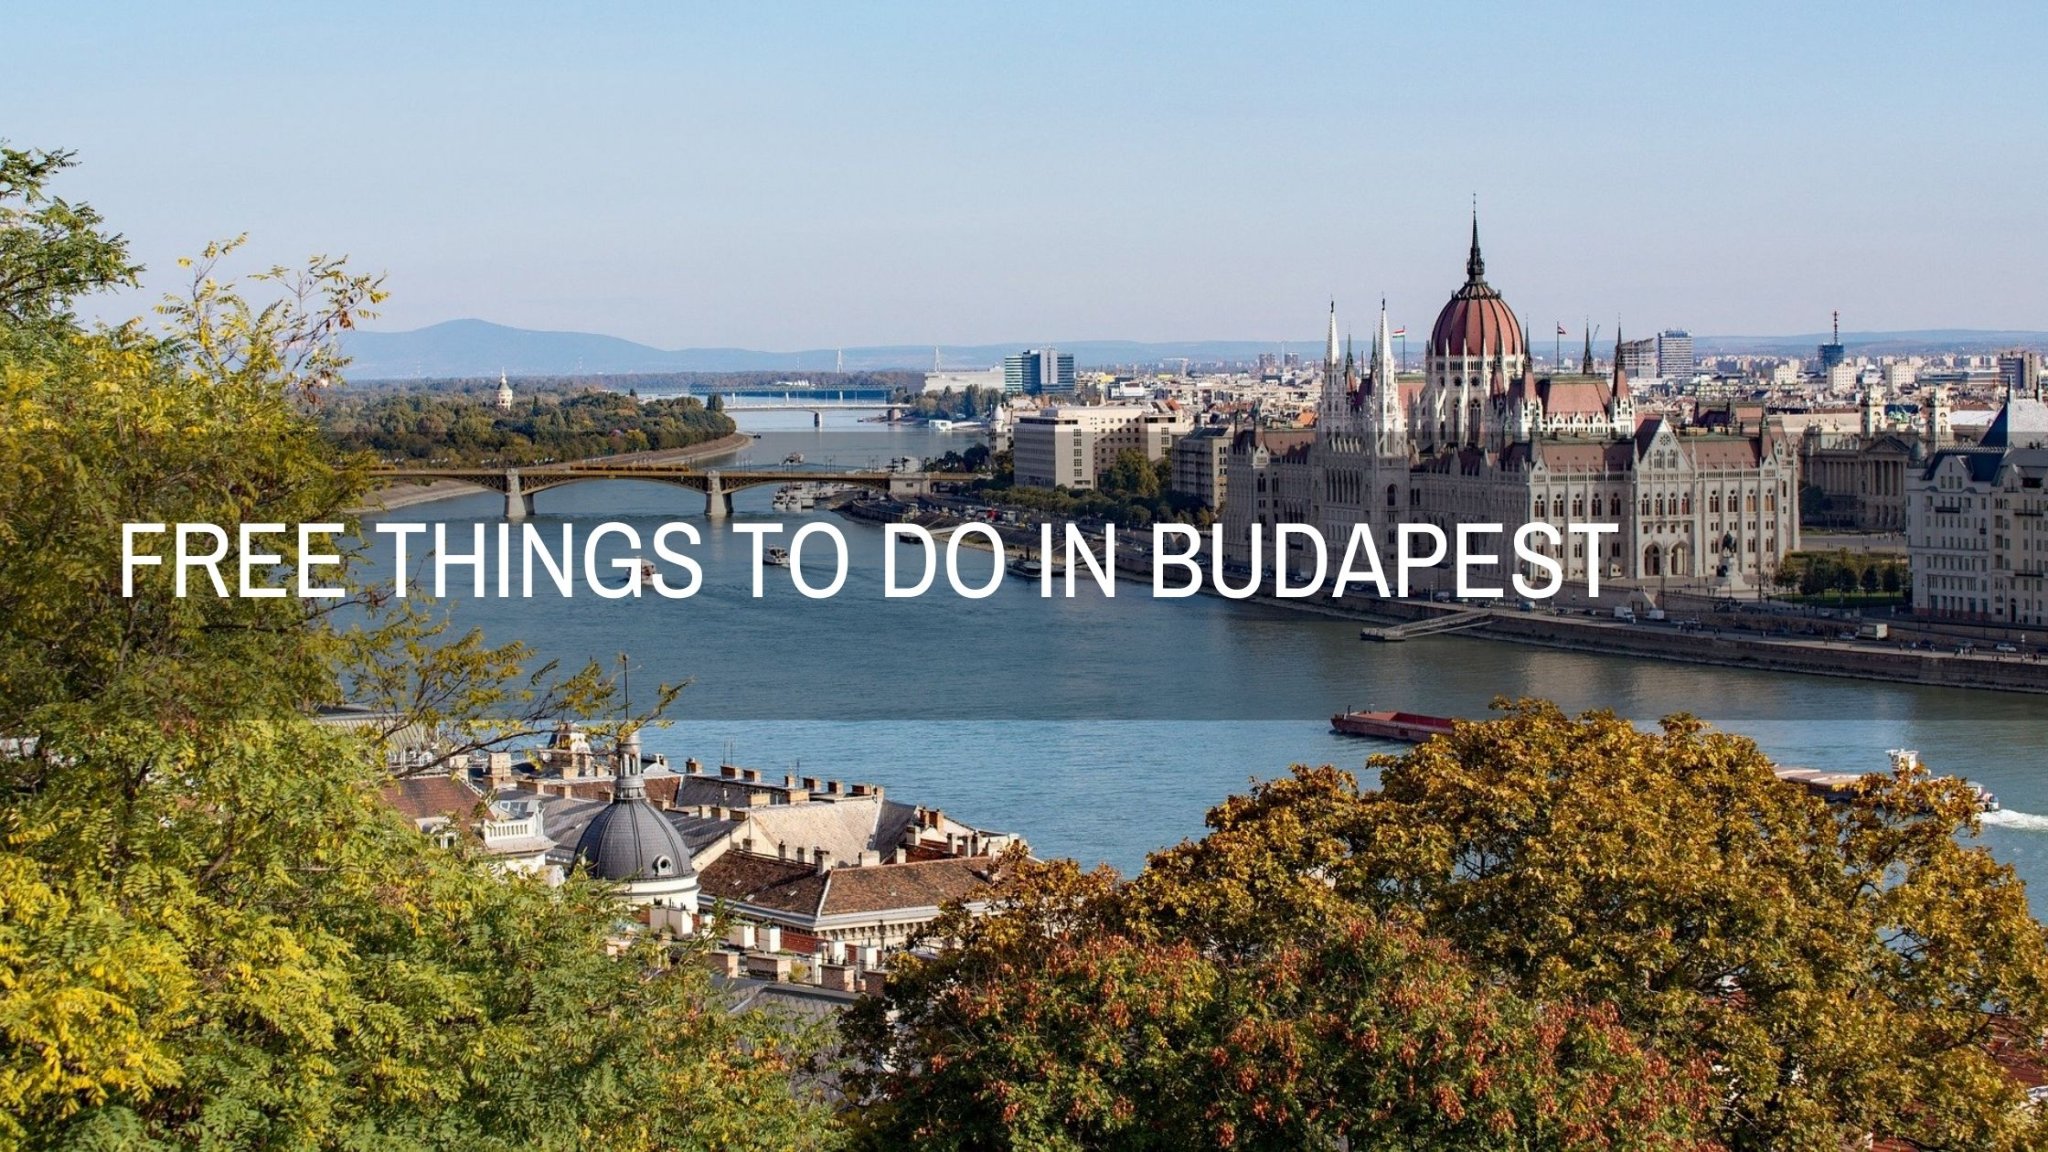 FREE Things to Do in Budapest | Looknwalk